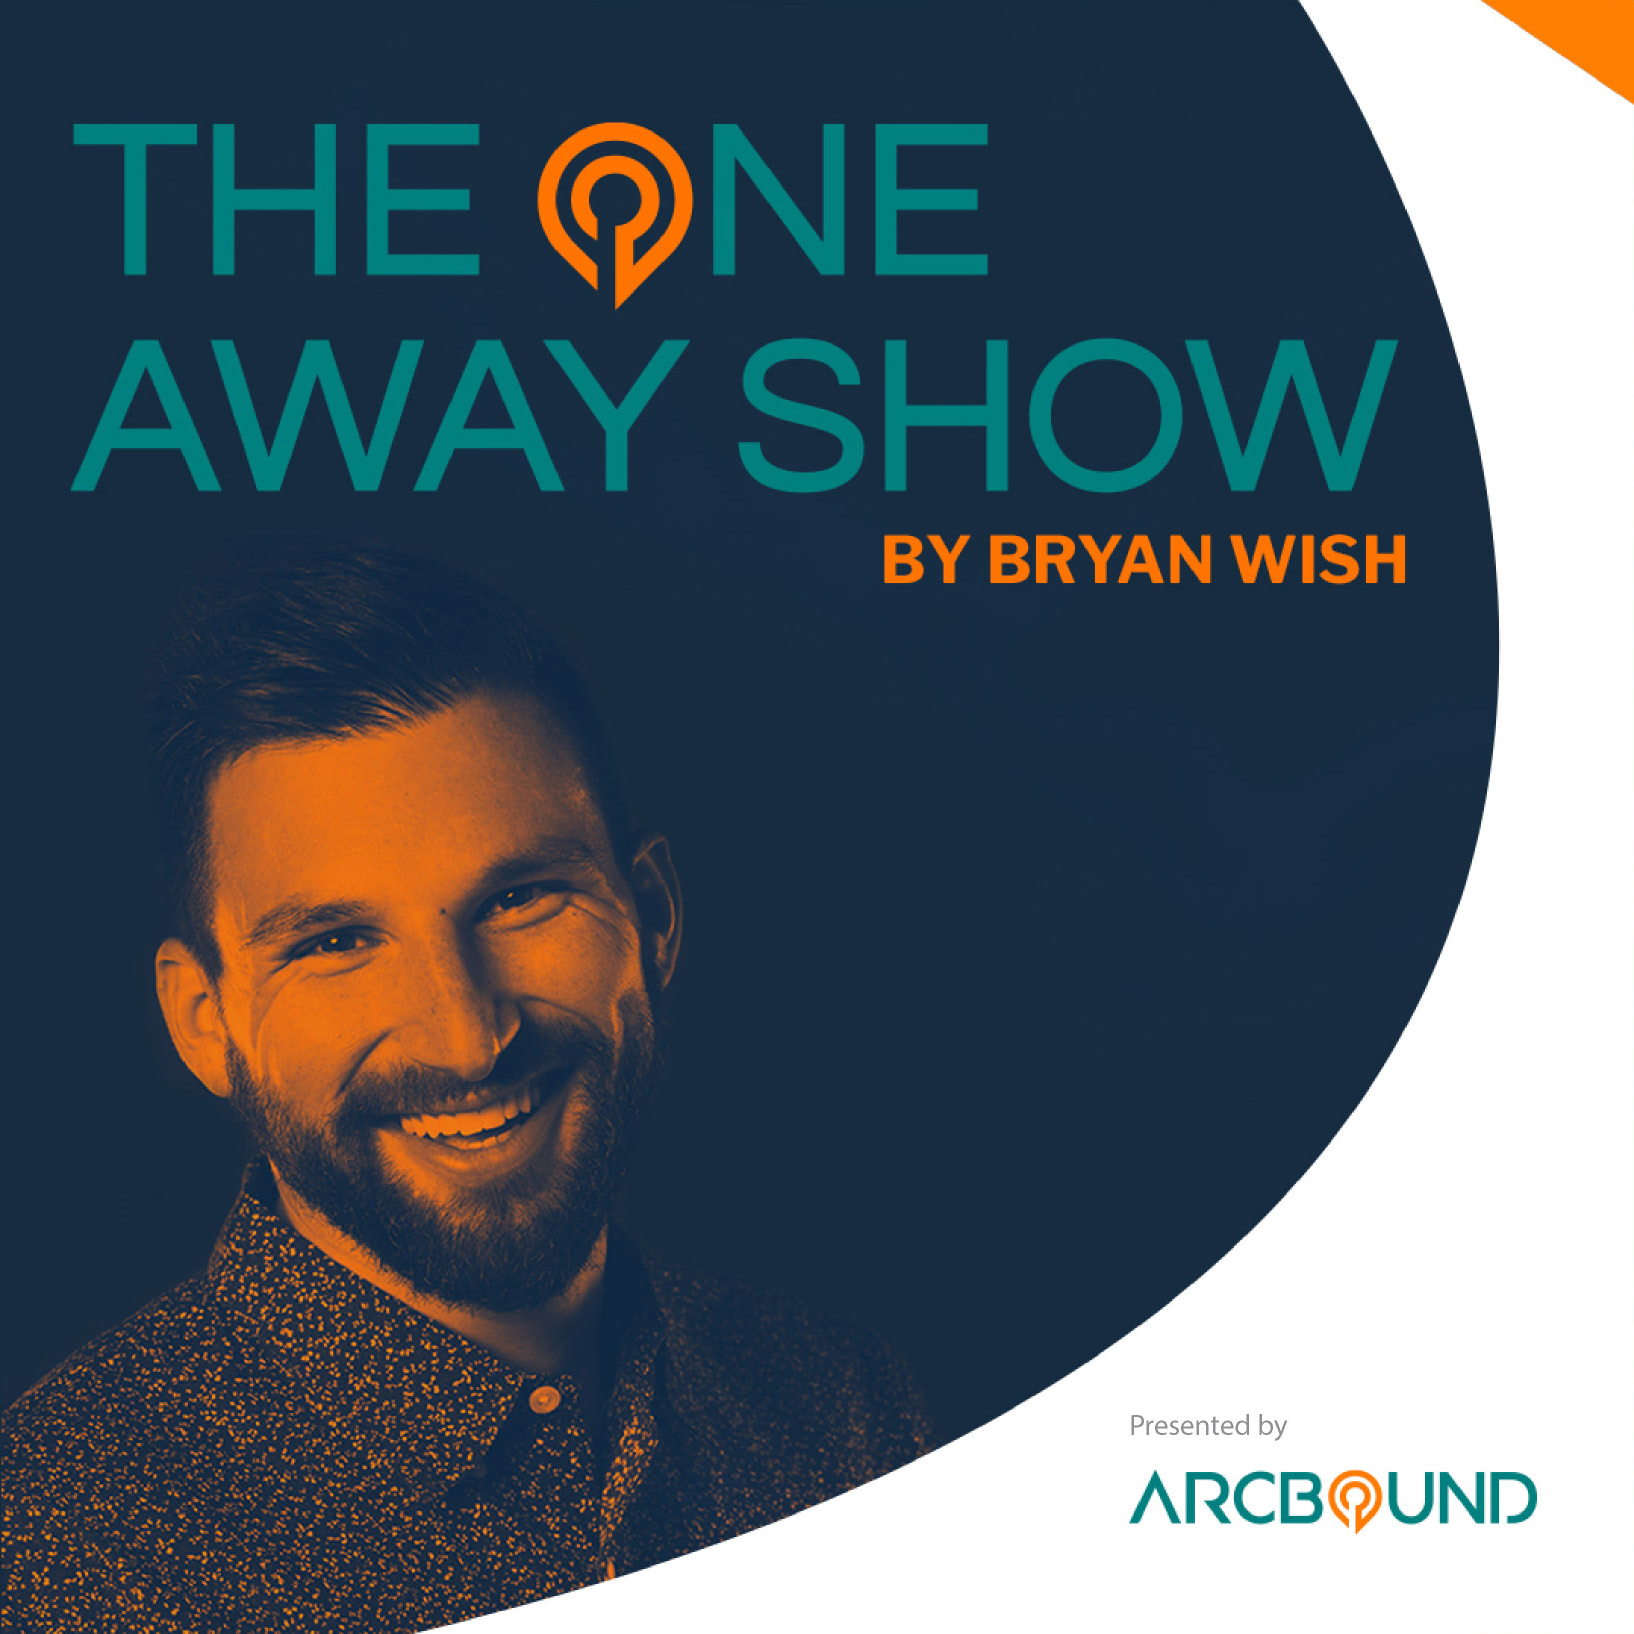 The One Away Show